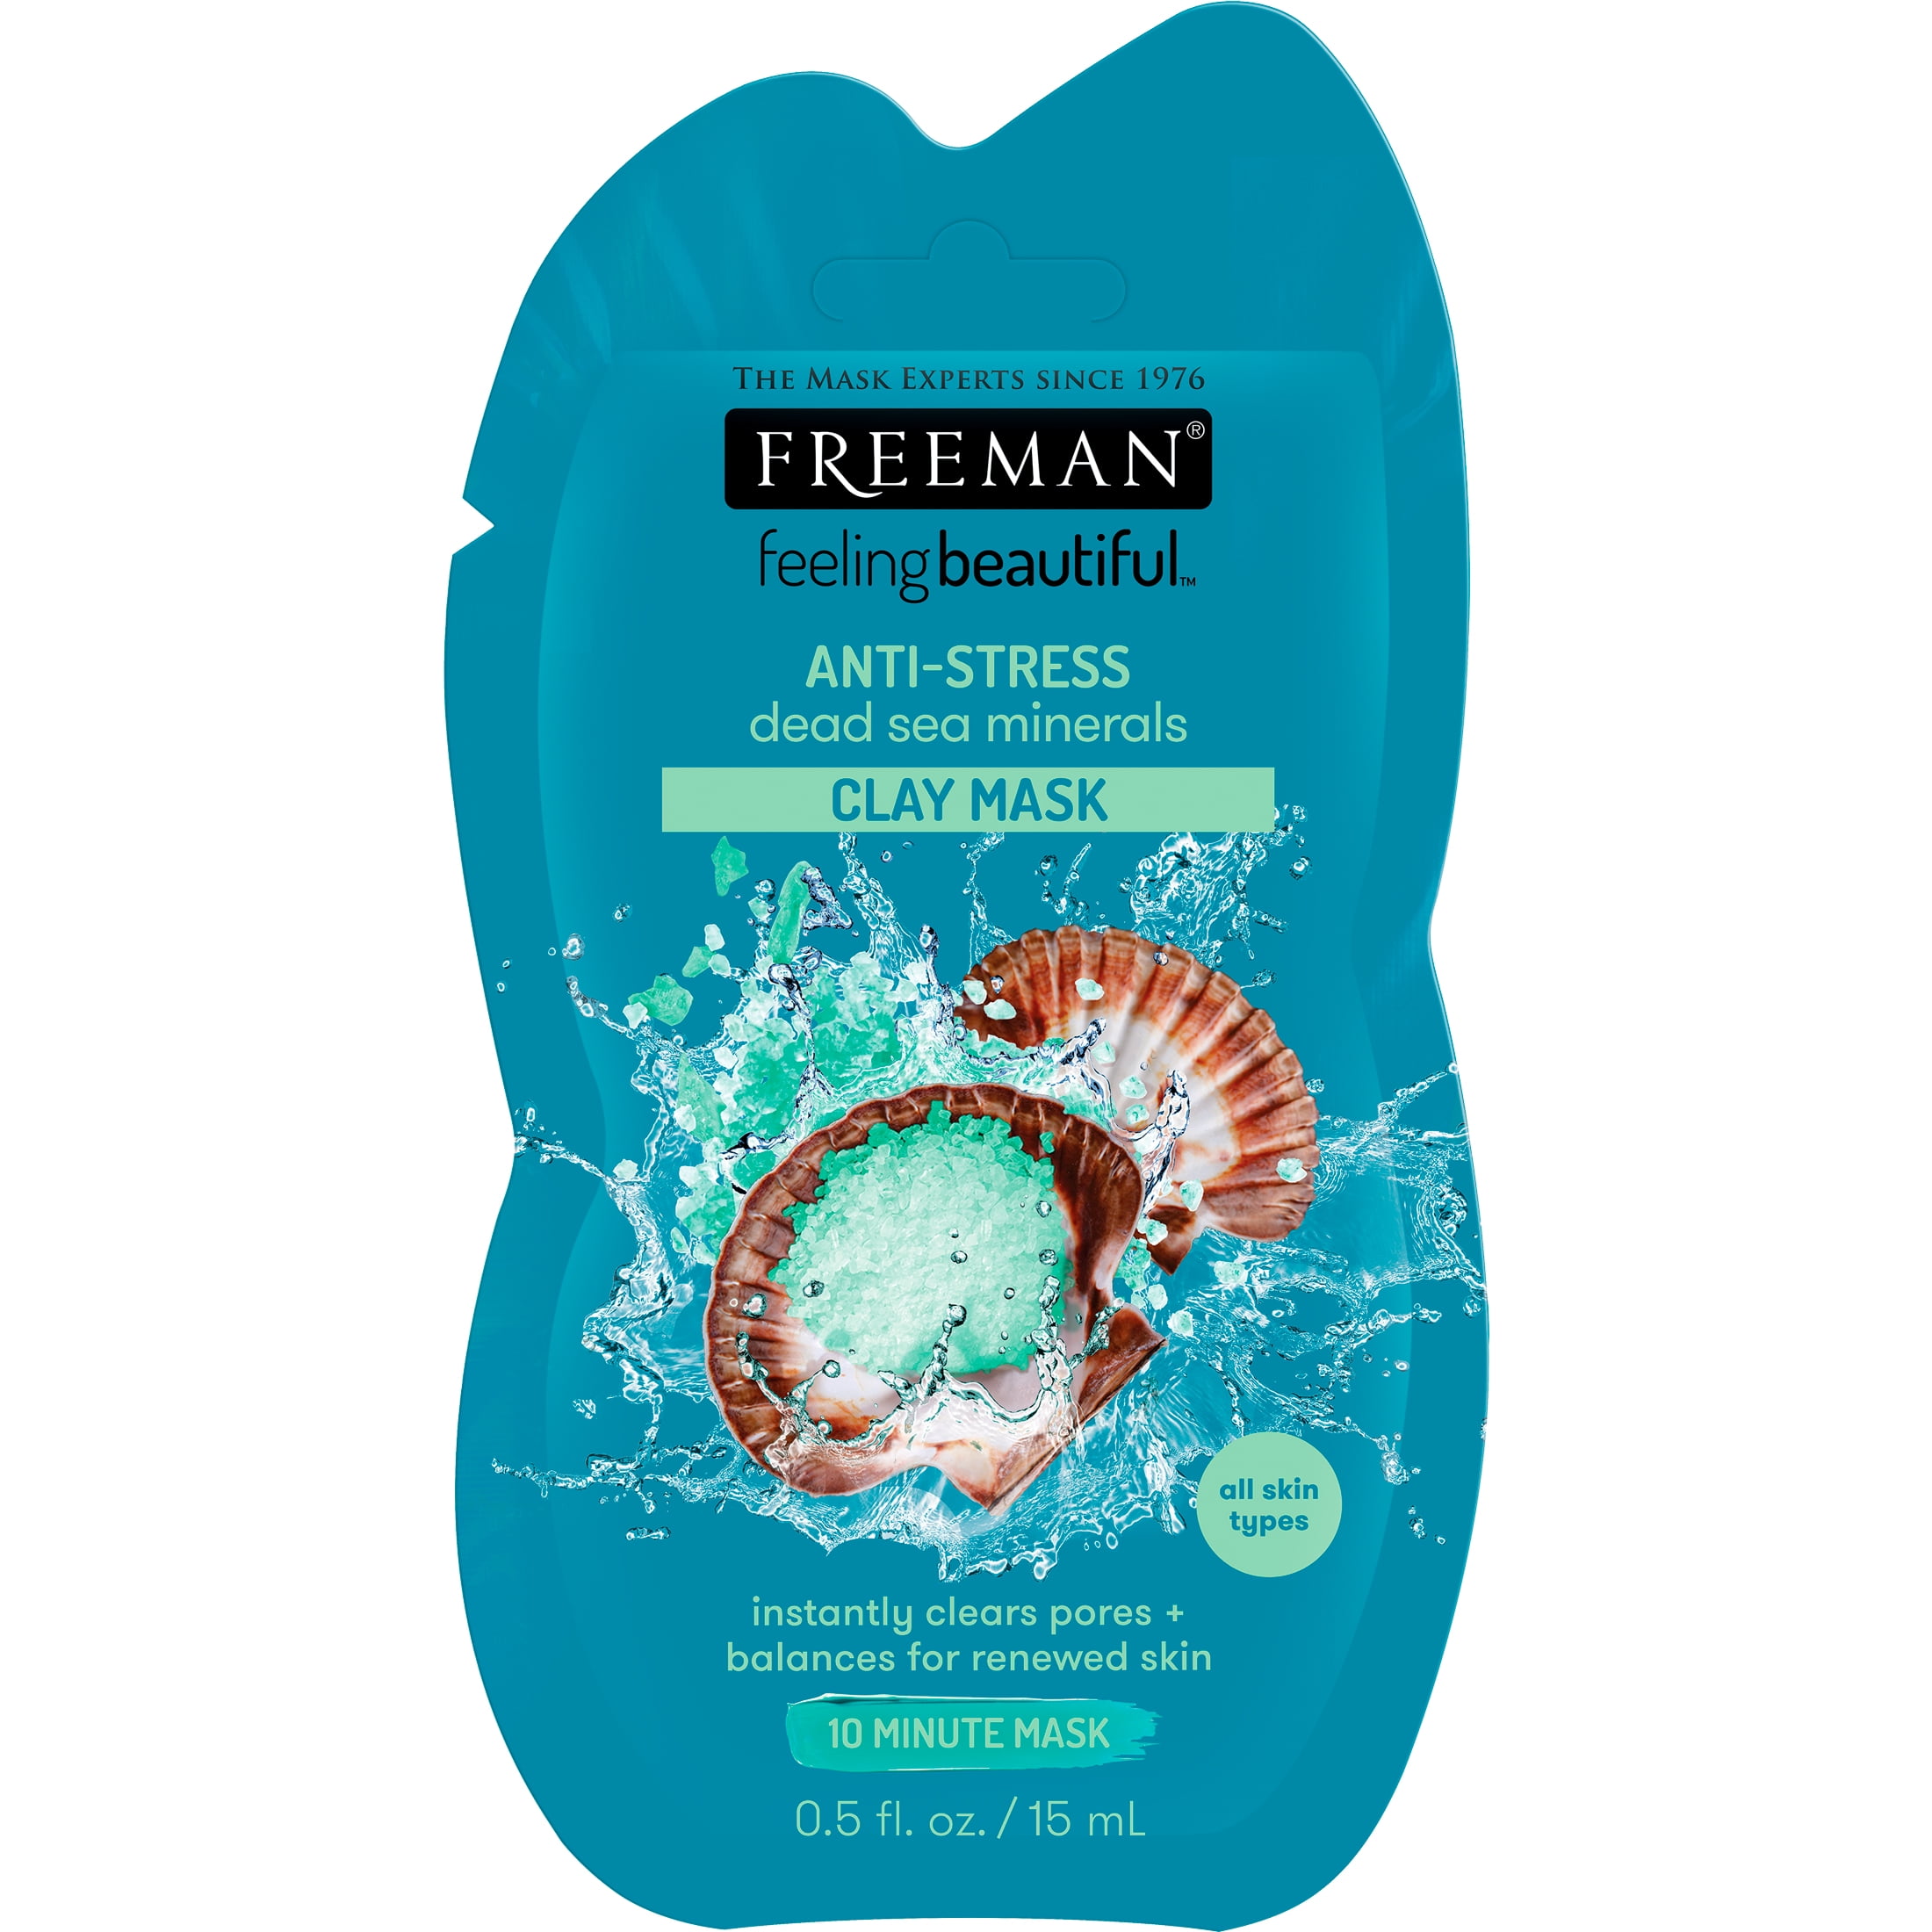 Freeman Sea Minerals Anti-Stress Clay Facial Mask, Face Mask Balances Skin Moisture, Clears Pores, Perfect For All Skin Types, 0.5 15 mL - Walmart.com